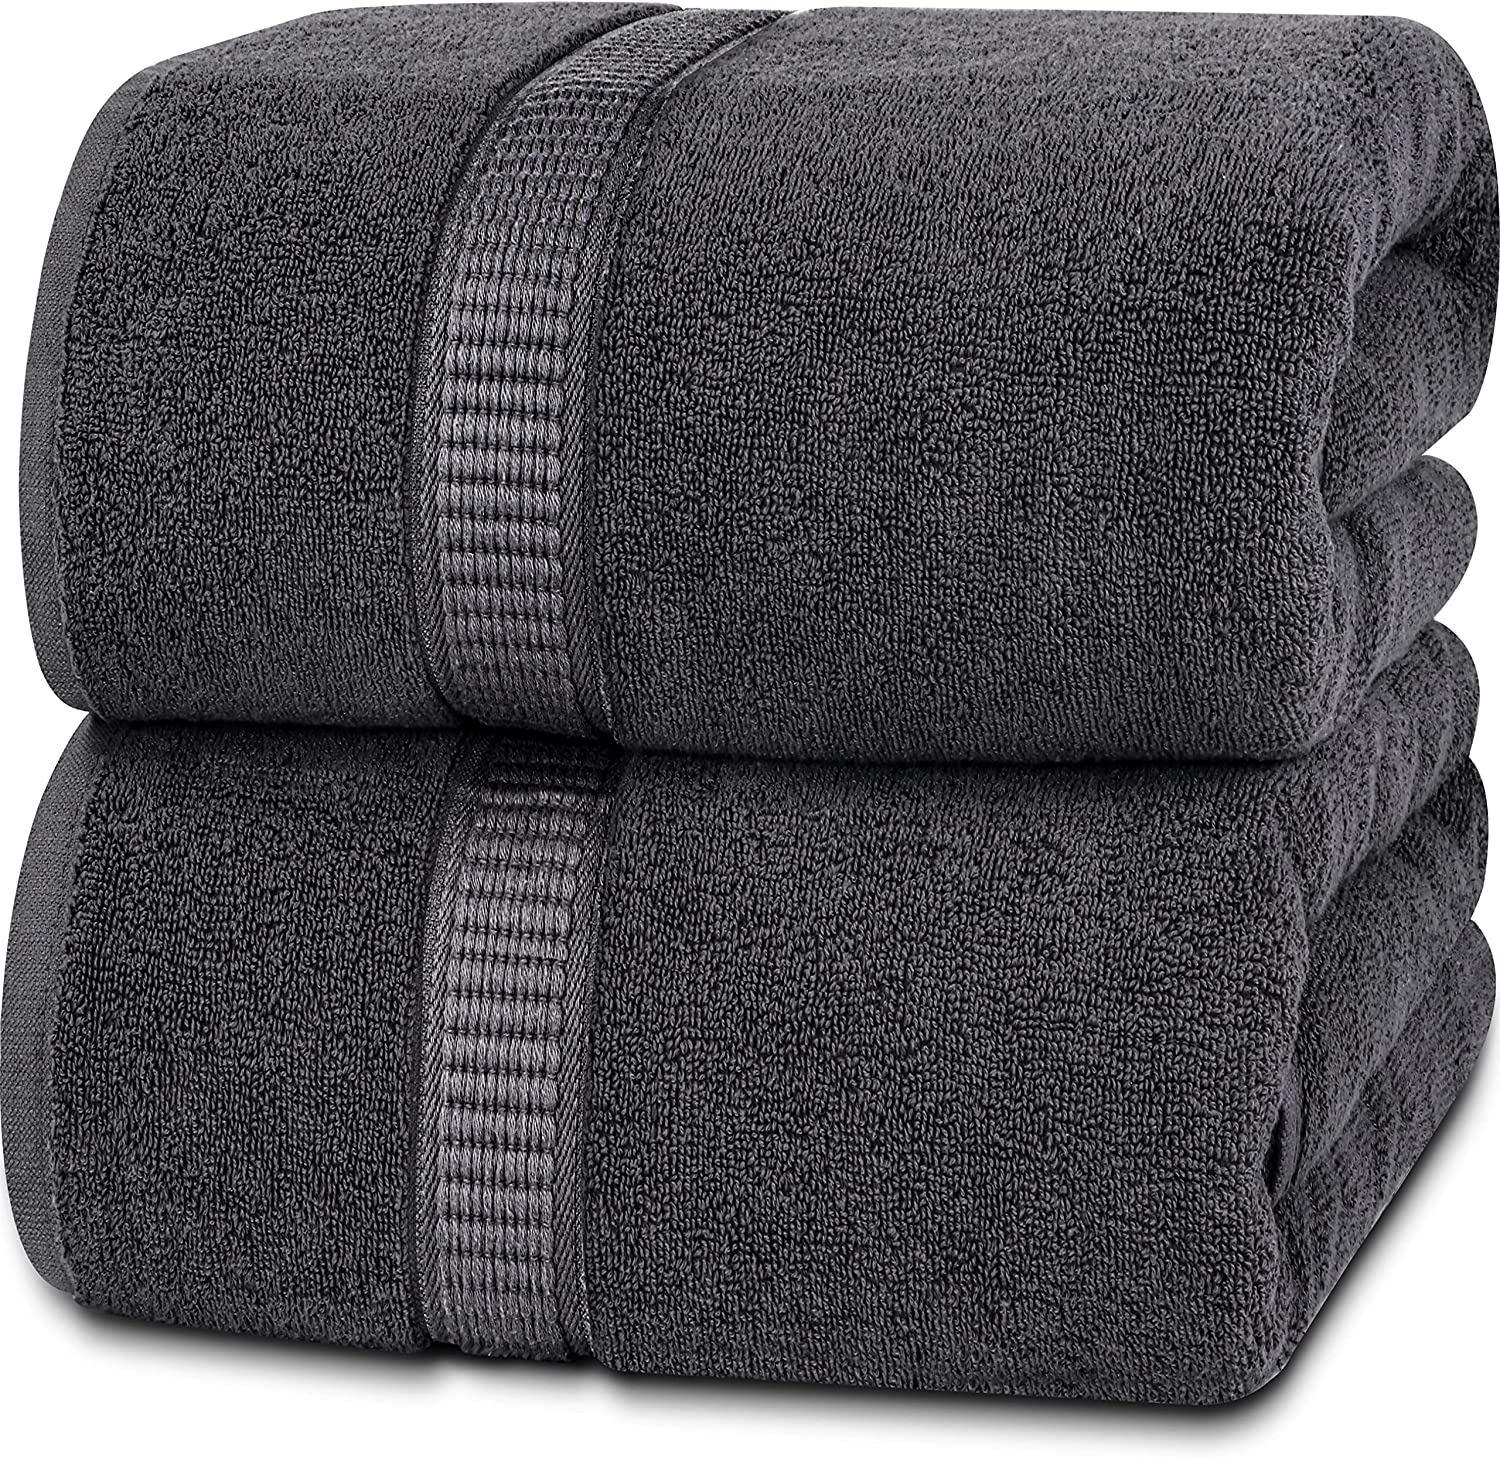 Lowest Price: Highly Rated Utopia Towels - Luxurious Jumbo Bath  Sheet 2 Piece